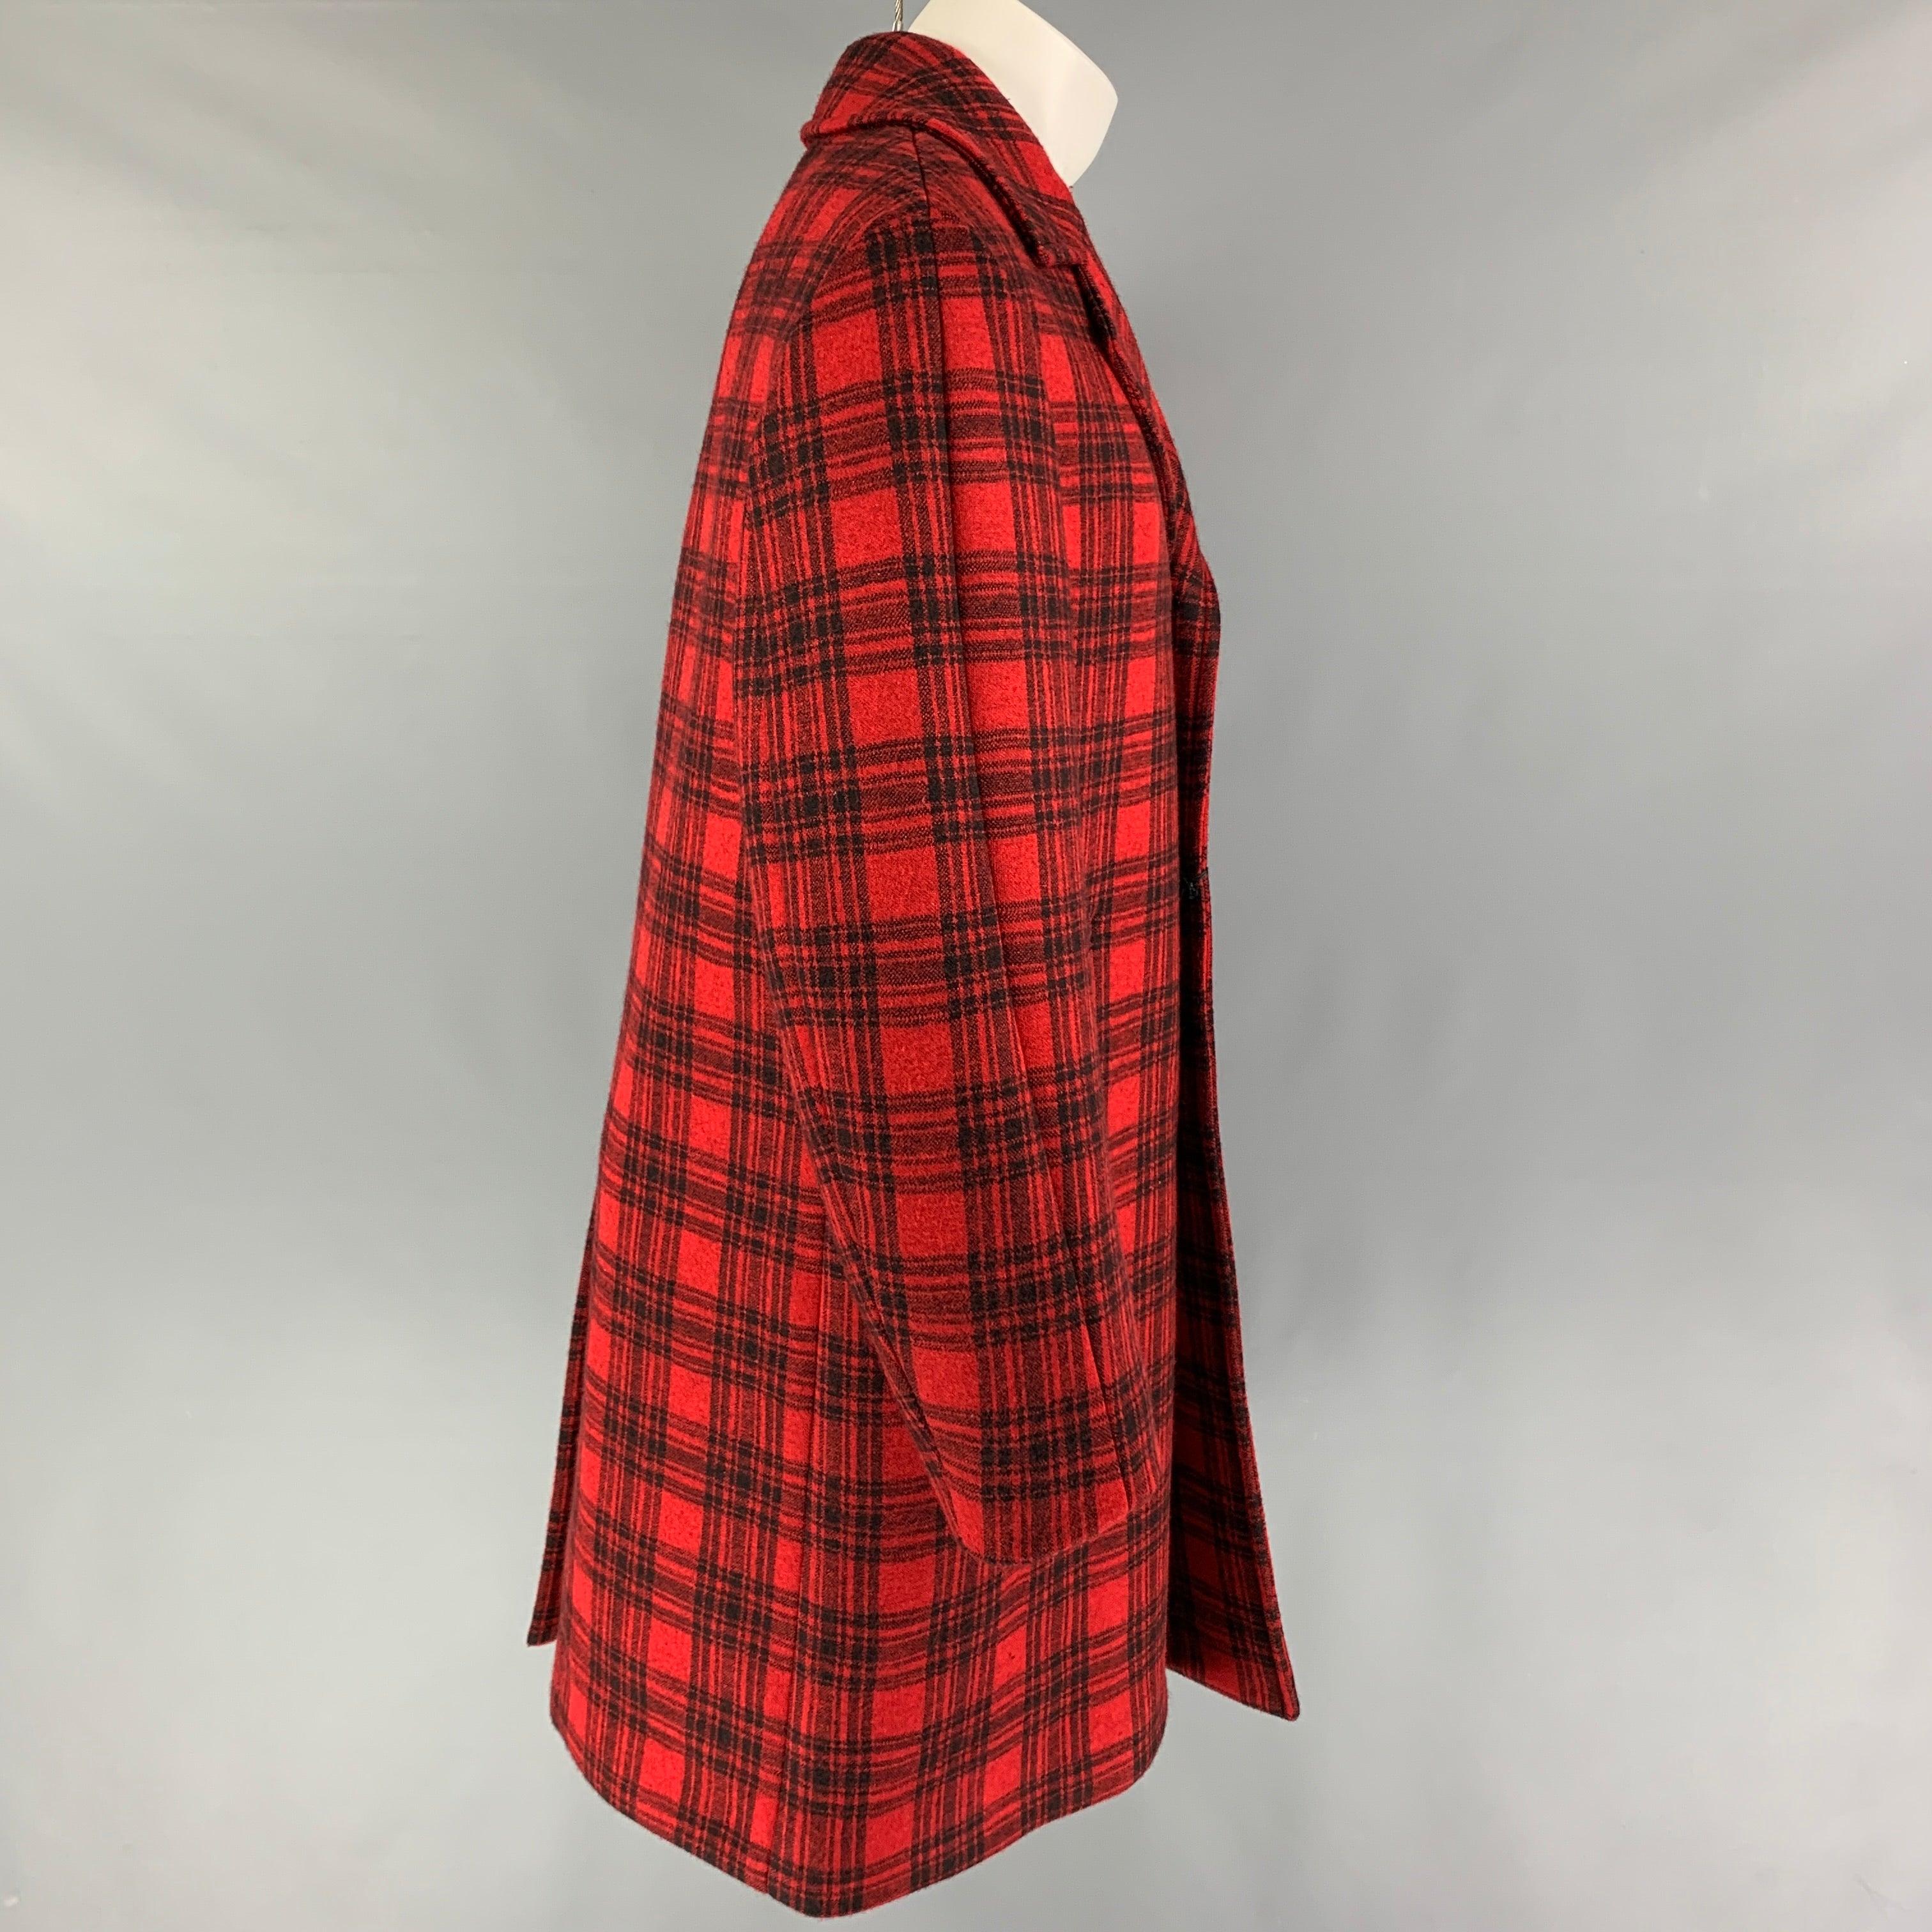 GUCCI FW 16
coat comes in a red & black plaid wool blend with a full liner featuring a notch lapel, oversized, slit pockets, single back vent, and a buttoned closure. Made in Italy. New With Tags. 

Marked:  50 

Measurements: 
 
Shoulder: 19 inches